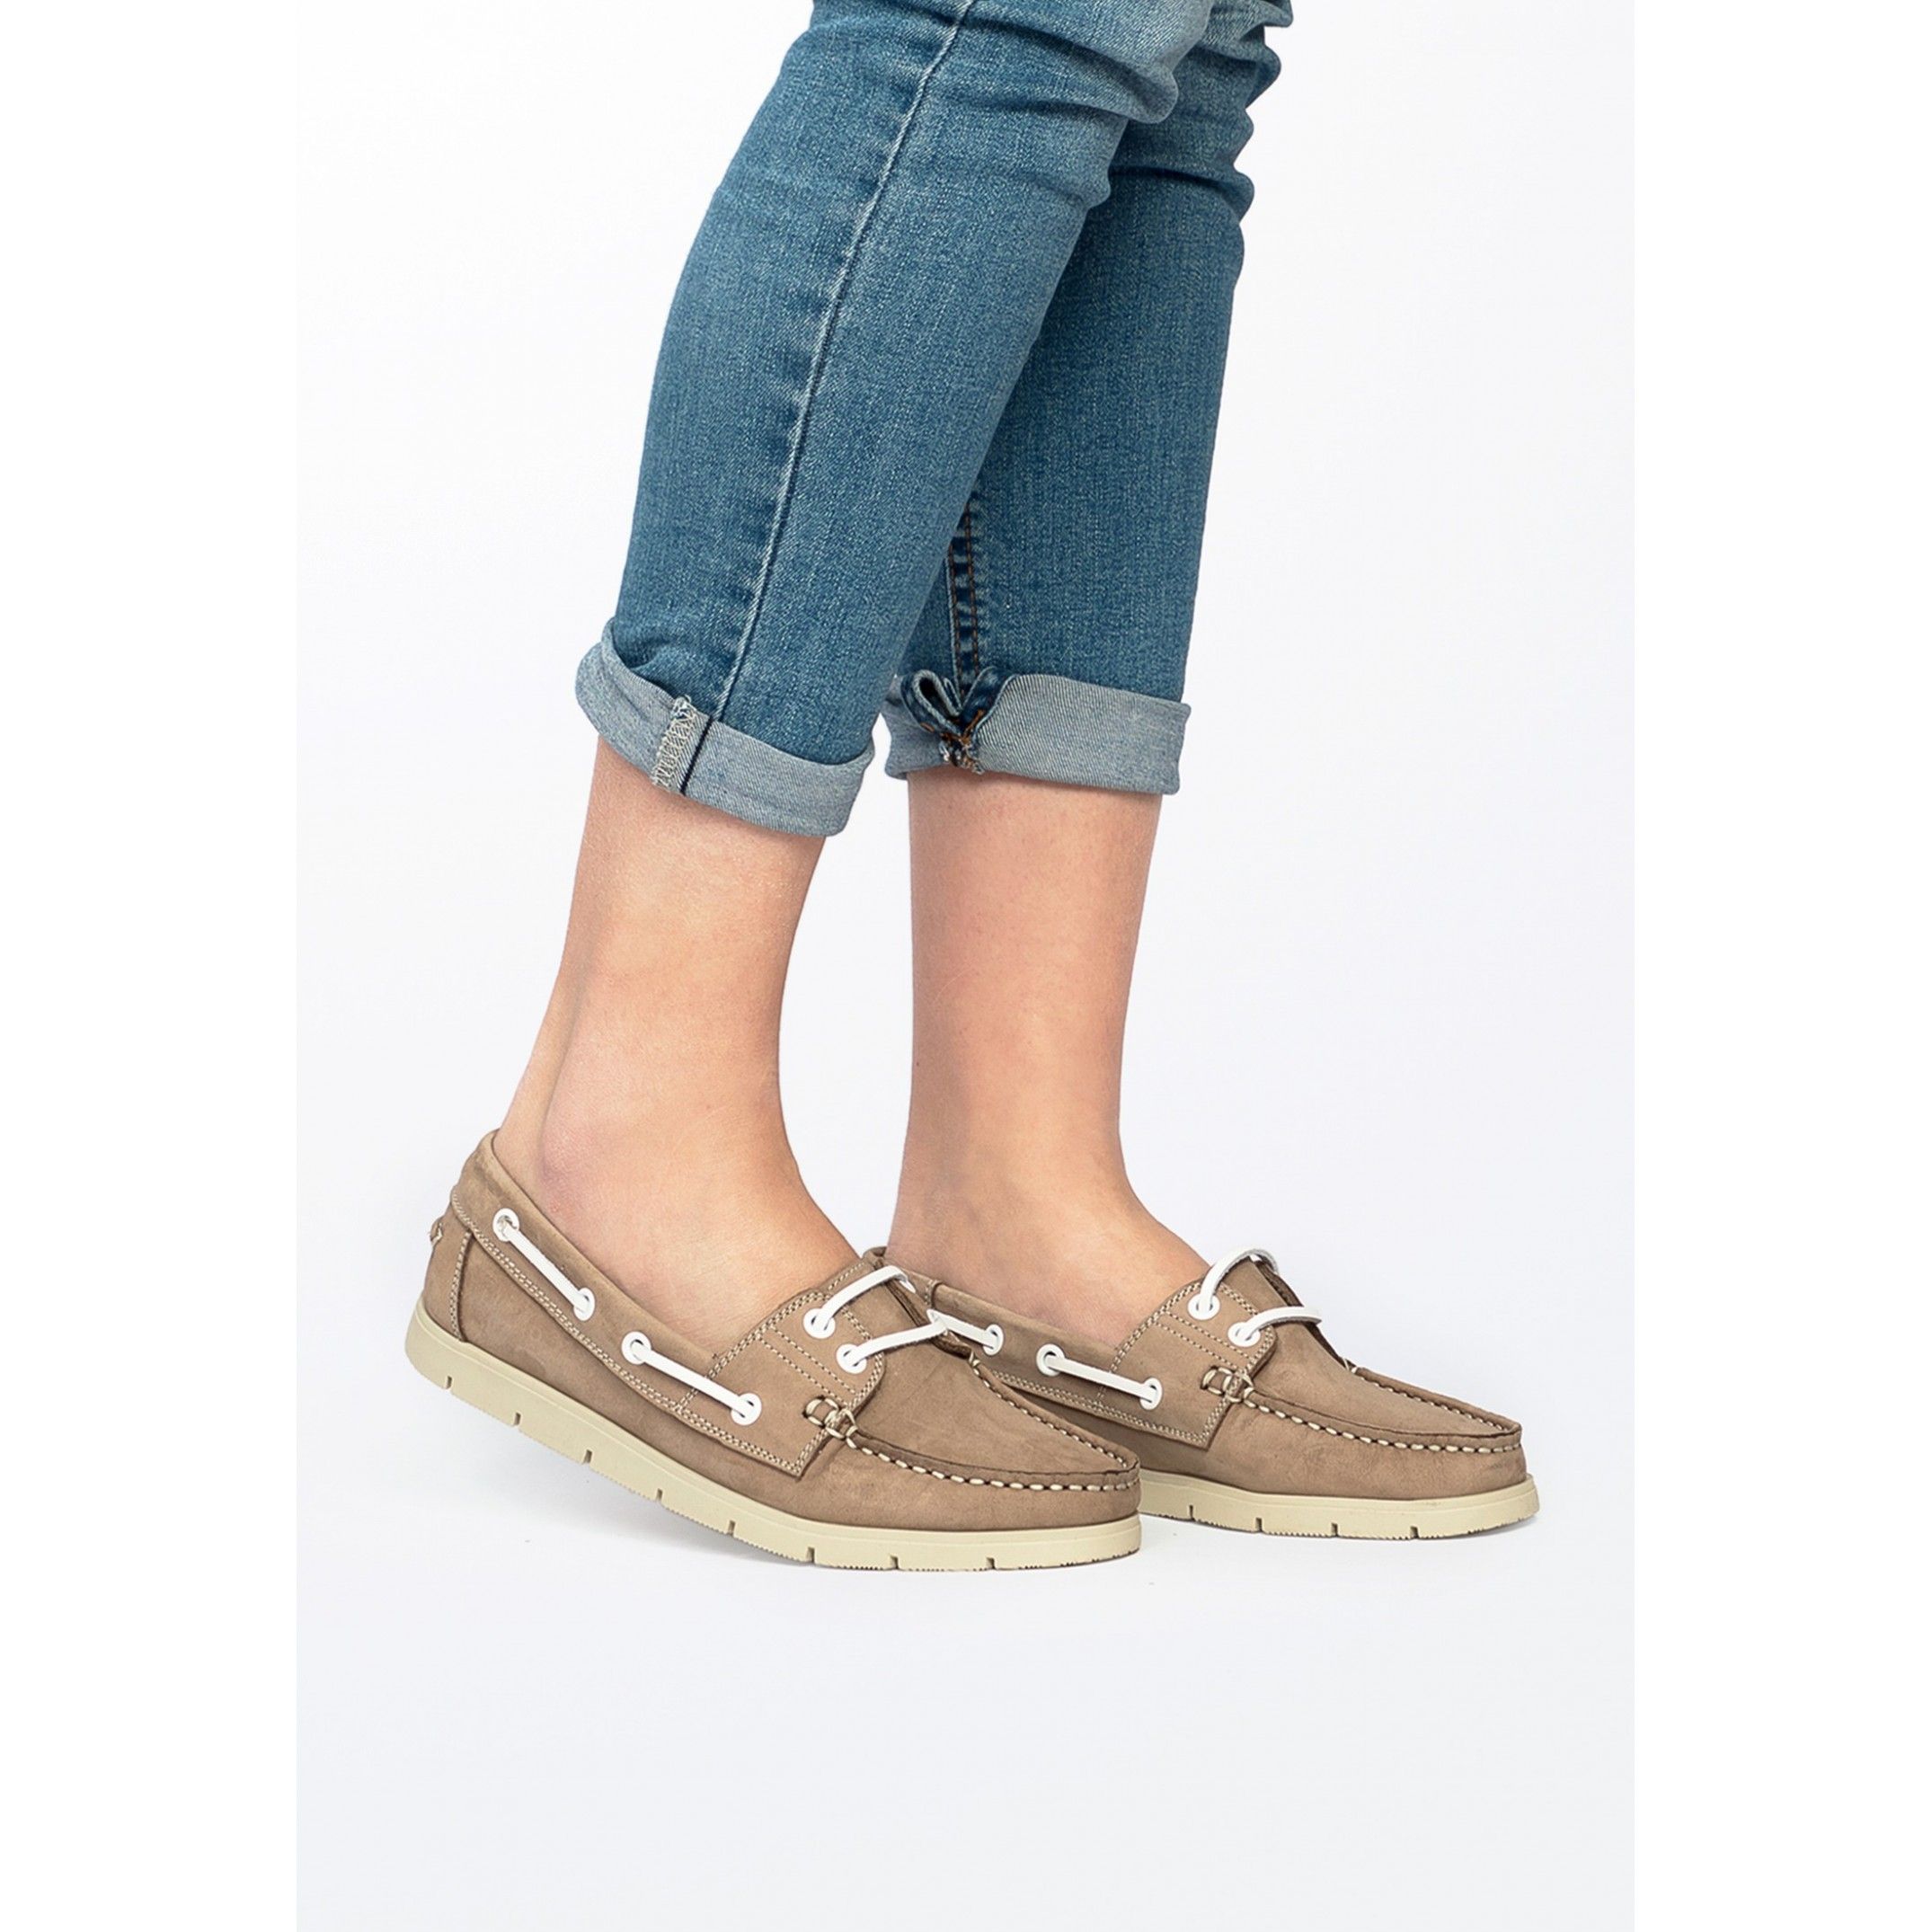 Leather boat shoes for women, by Son Castellanisimos. Upper made of cowhide leather. Leather laces closure. Inner lining and insole made of cowhide leather. Sole material: synthetic and non slip. Heel height: 1,5 cm. Designed and made in Spain.